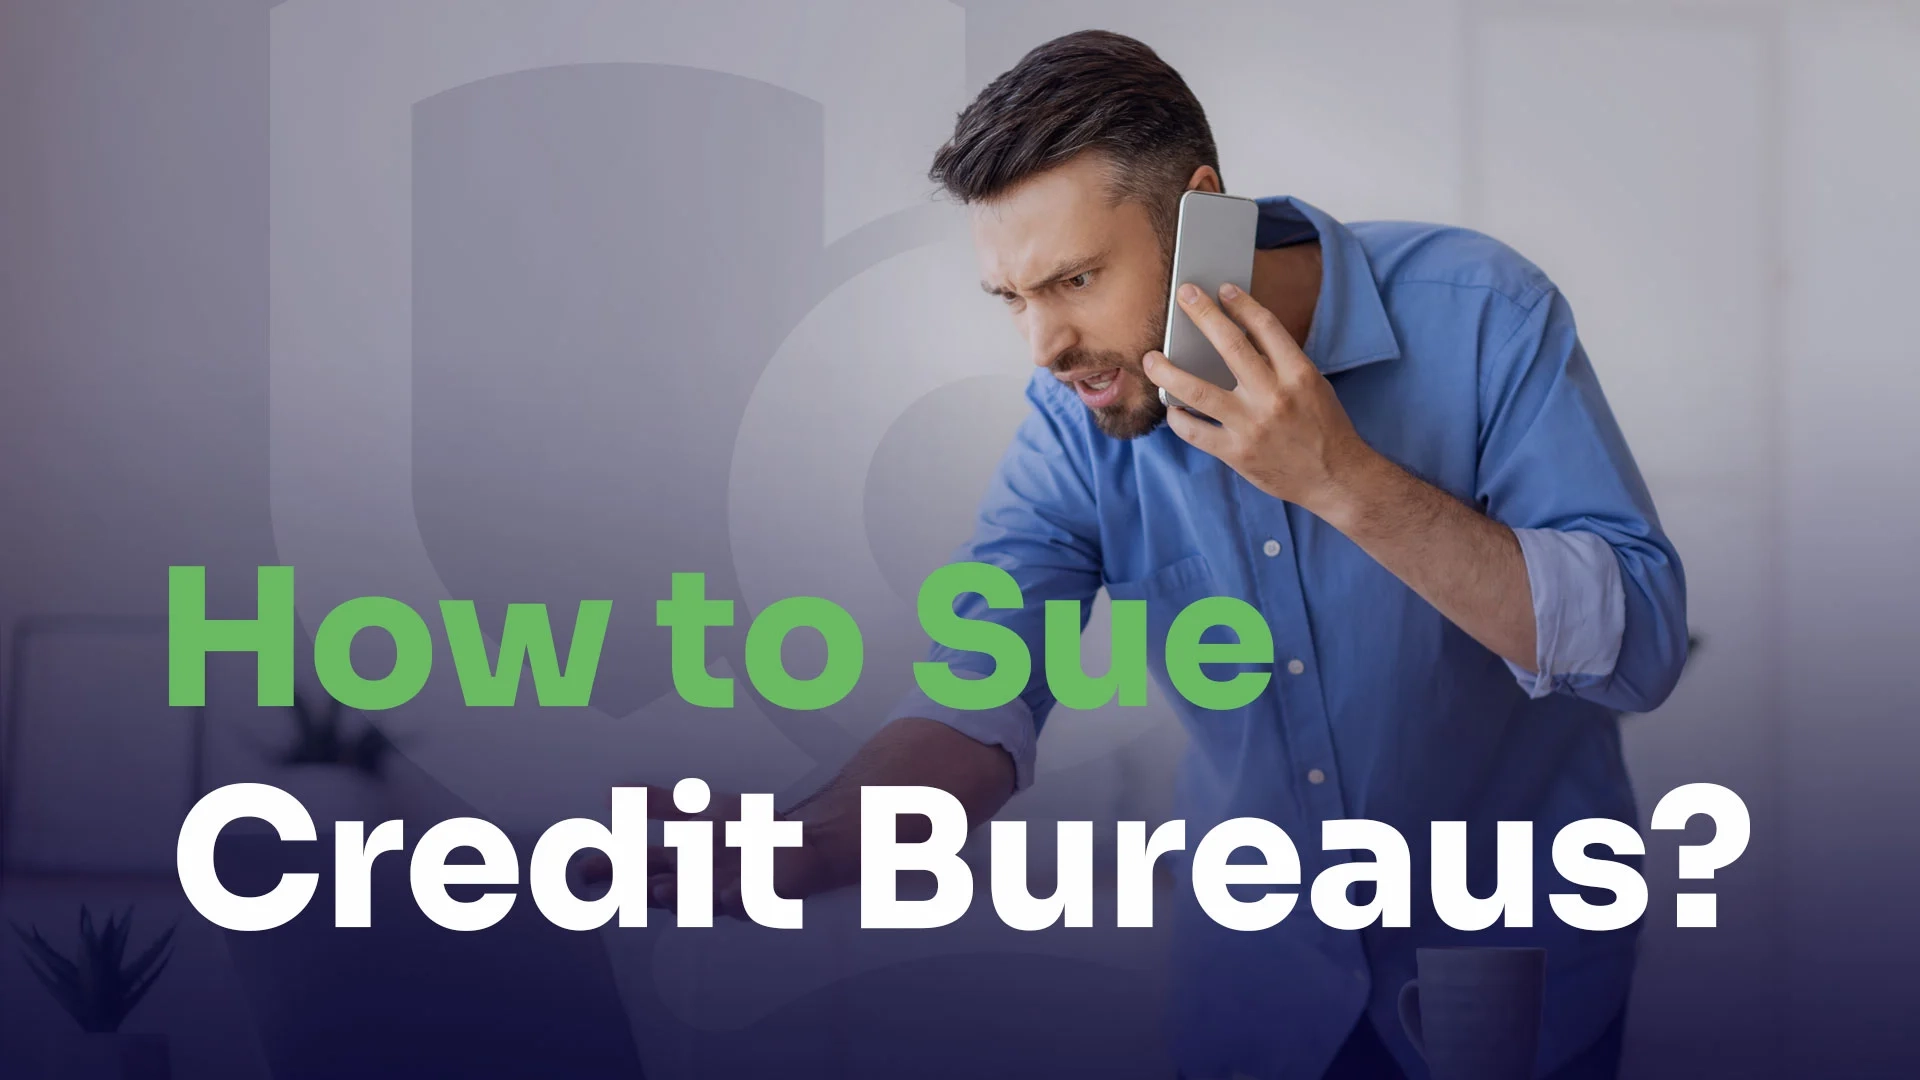 man holding a phone and wants to sue credit bureaus